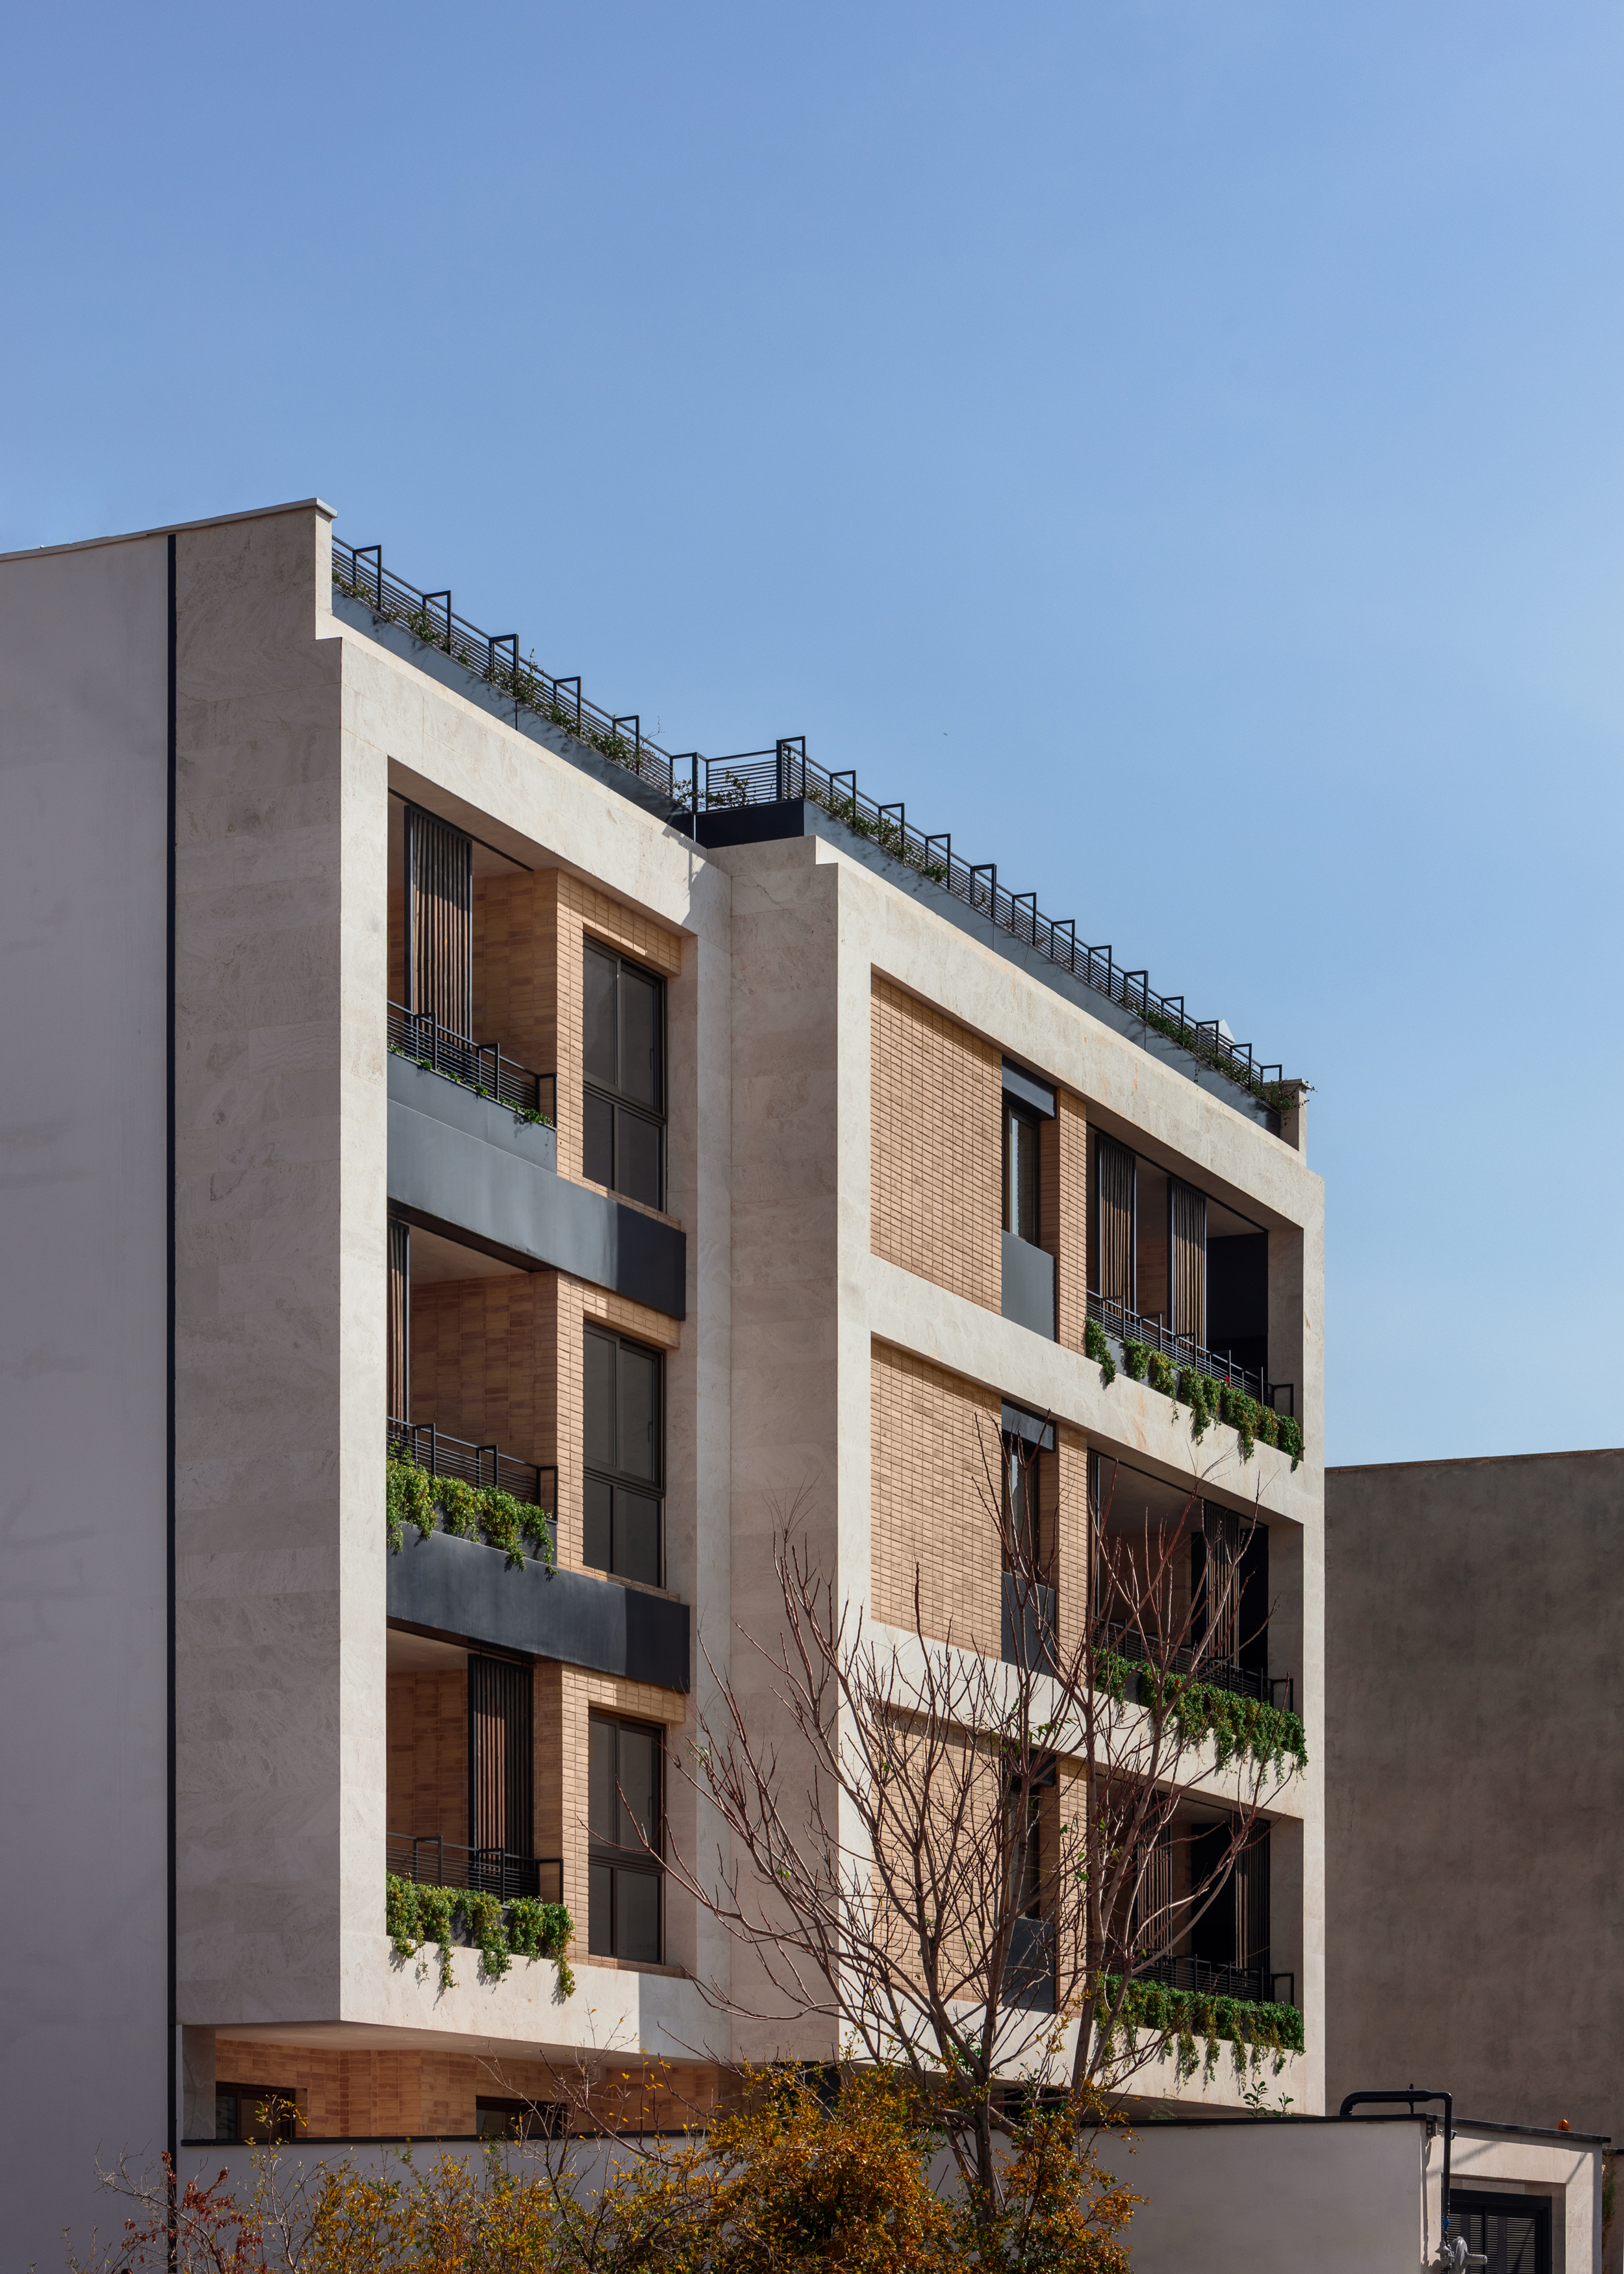 picture no. 12 ofApartment No. 05 project, designed by Ahmad Ghodsimanesh & Partners